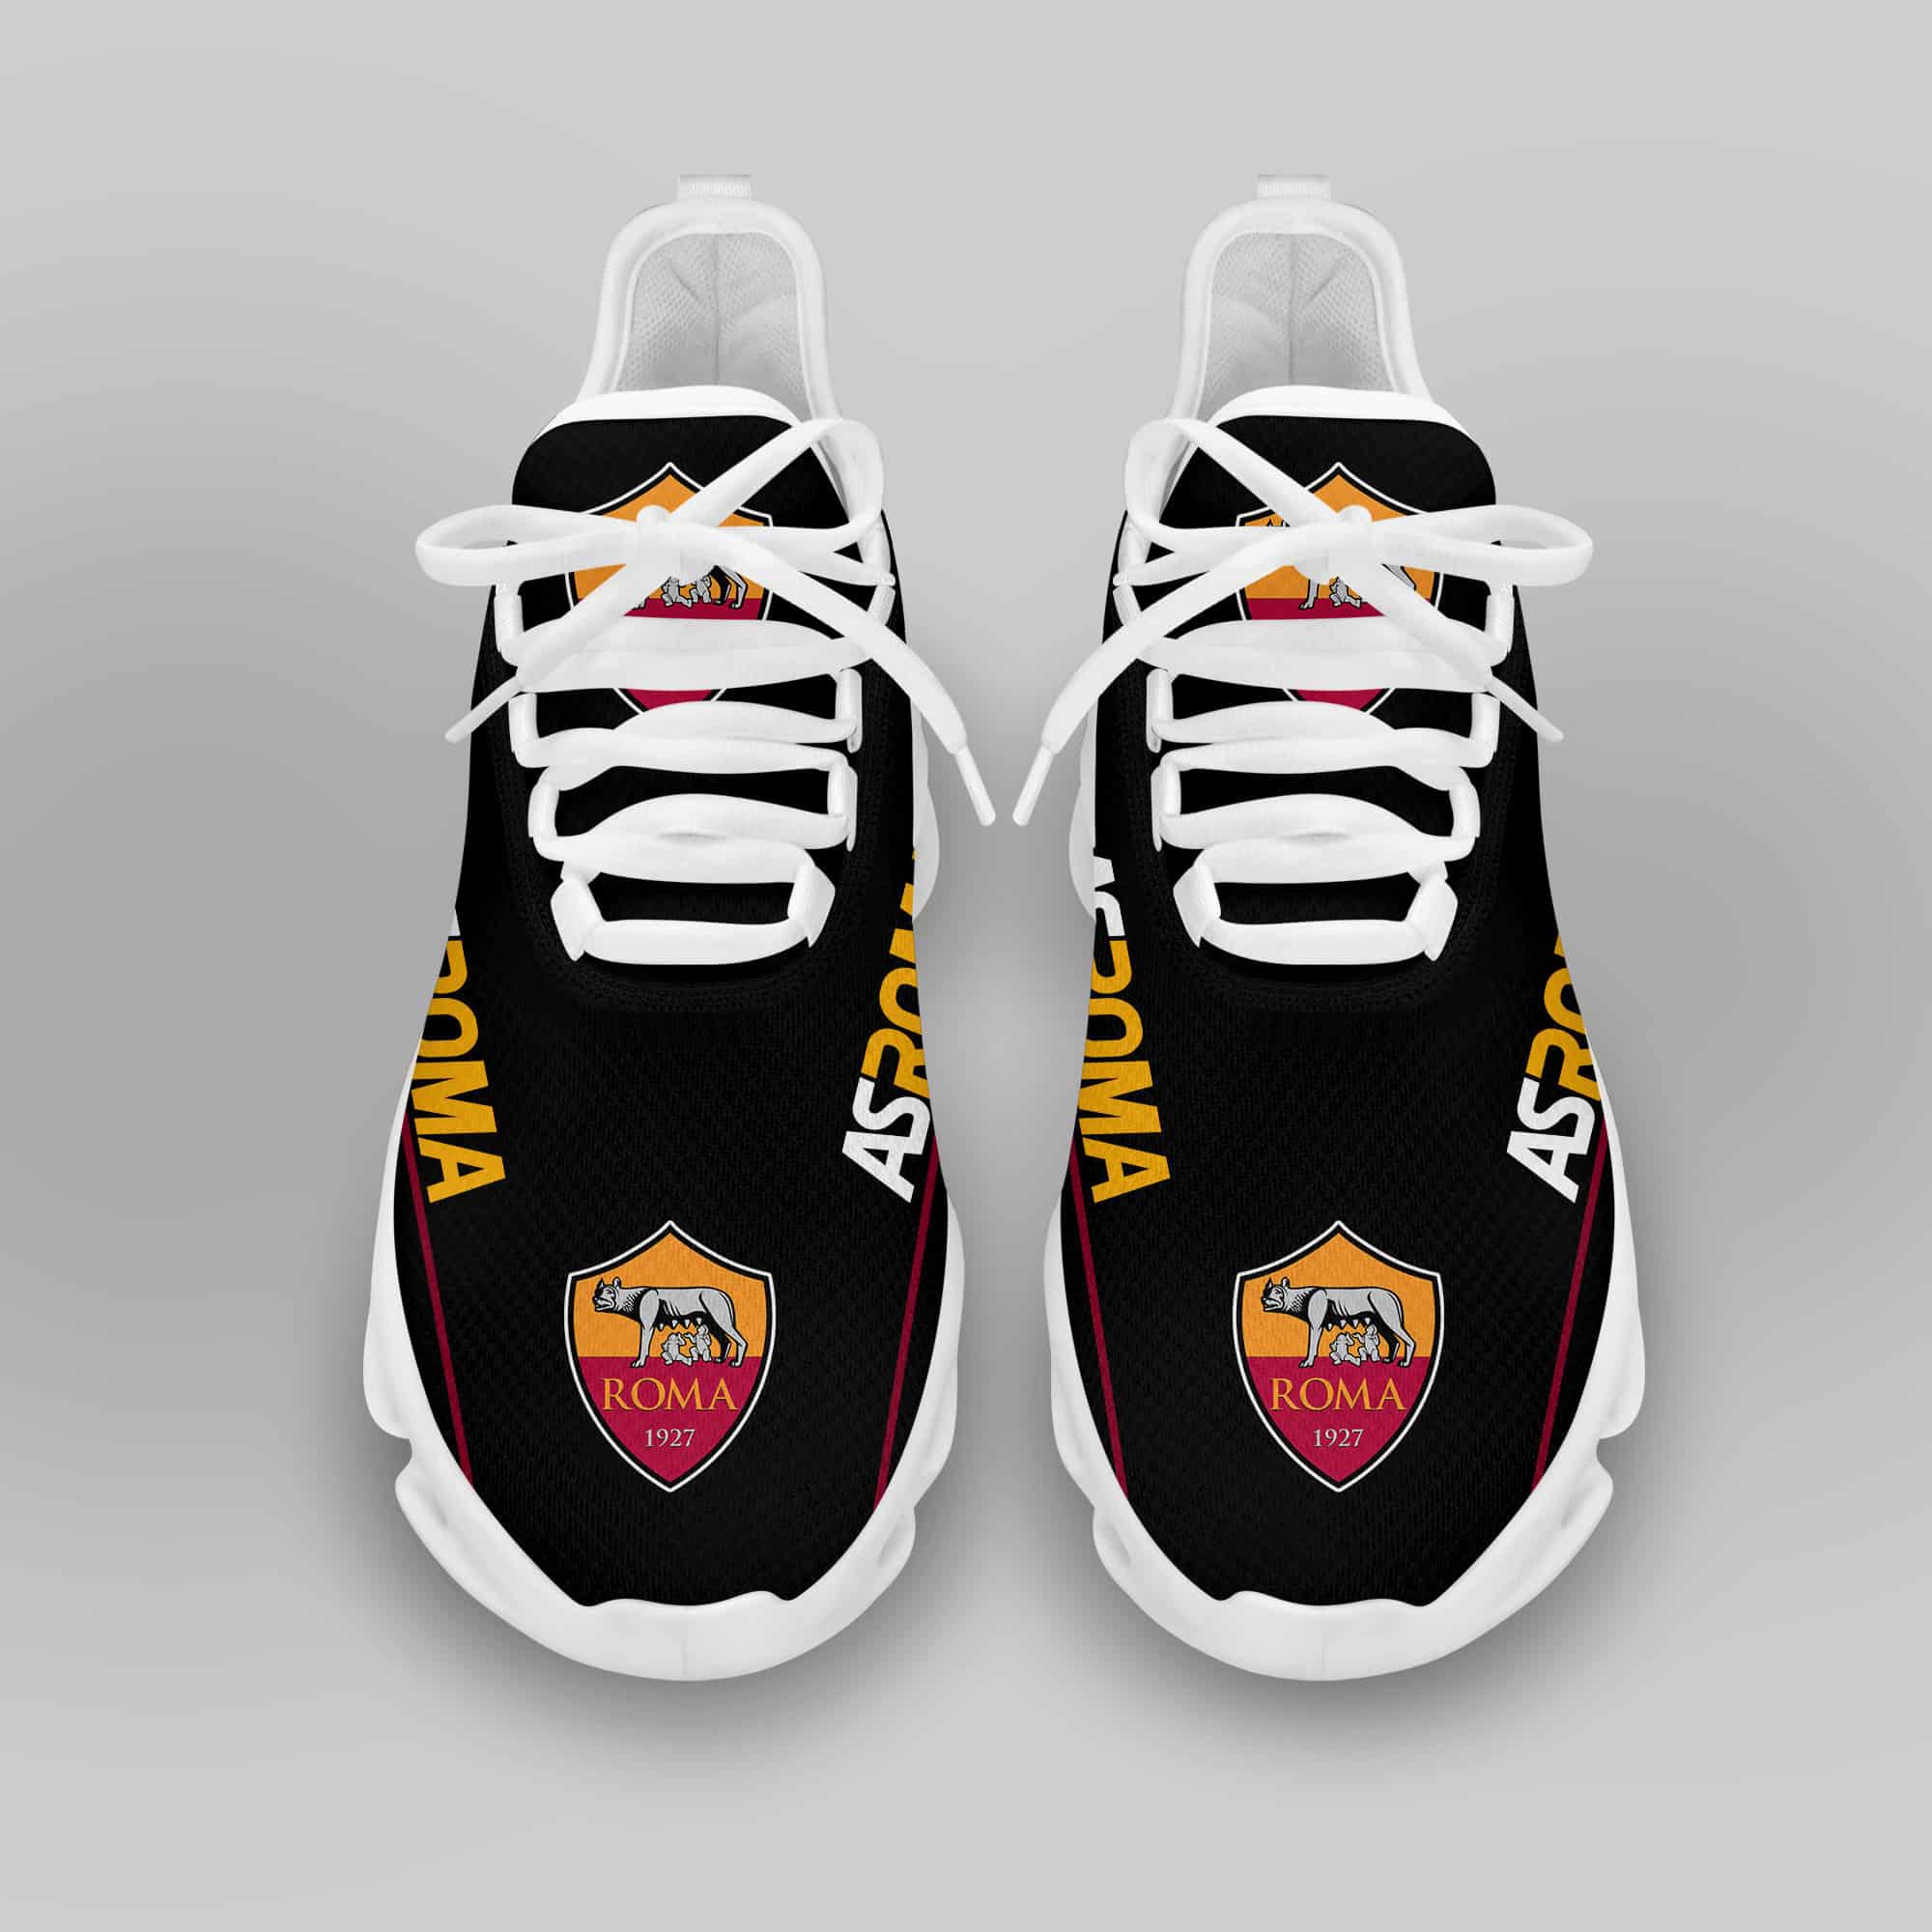 As Roma Running Shoes Max Soul Shoes Sneakers Ver 24 3